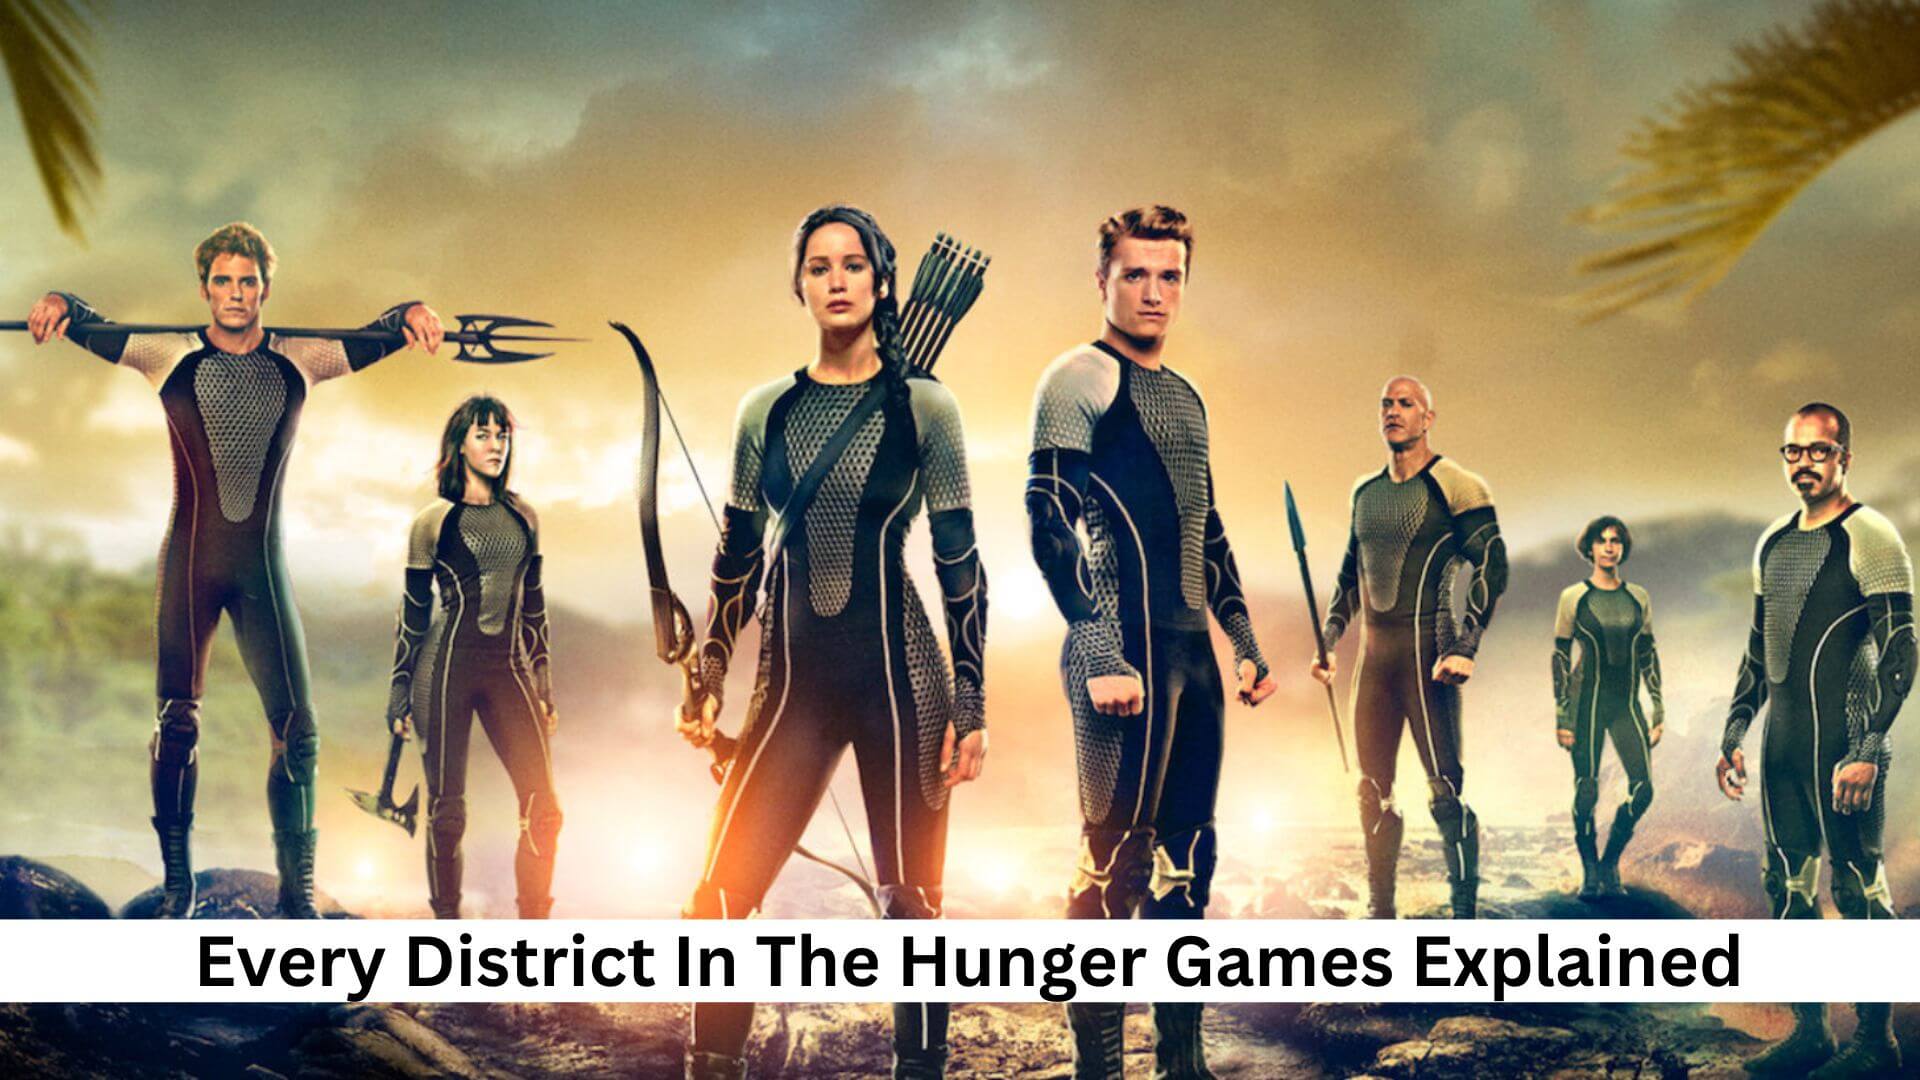 Every District In The Hunger Games Explained (1)